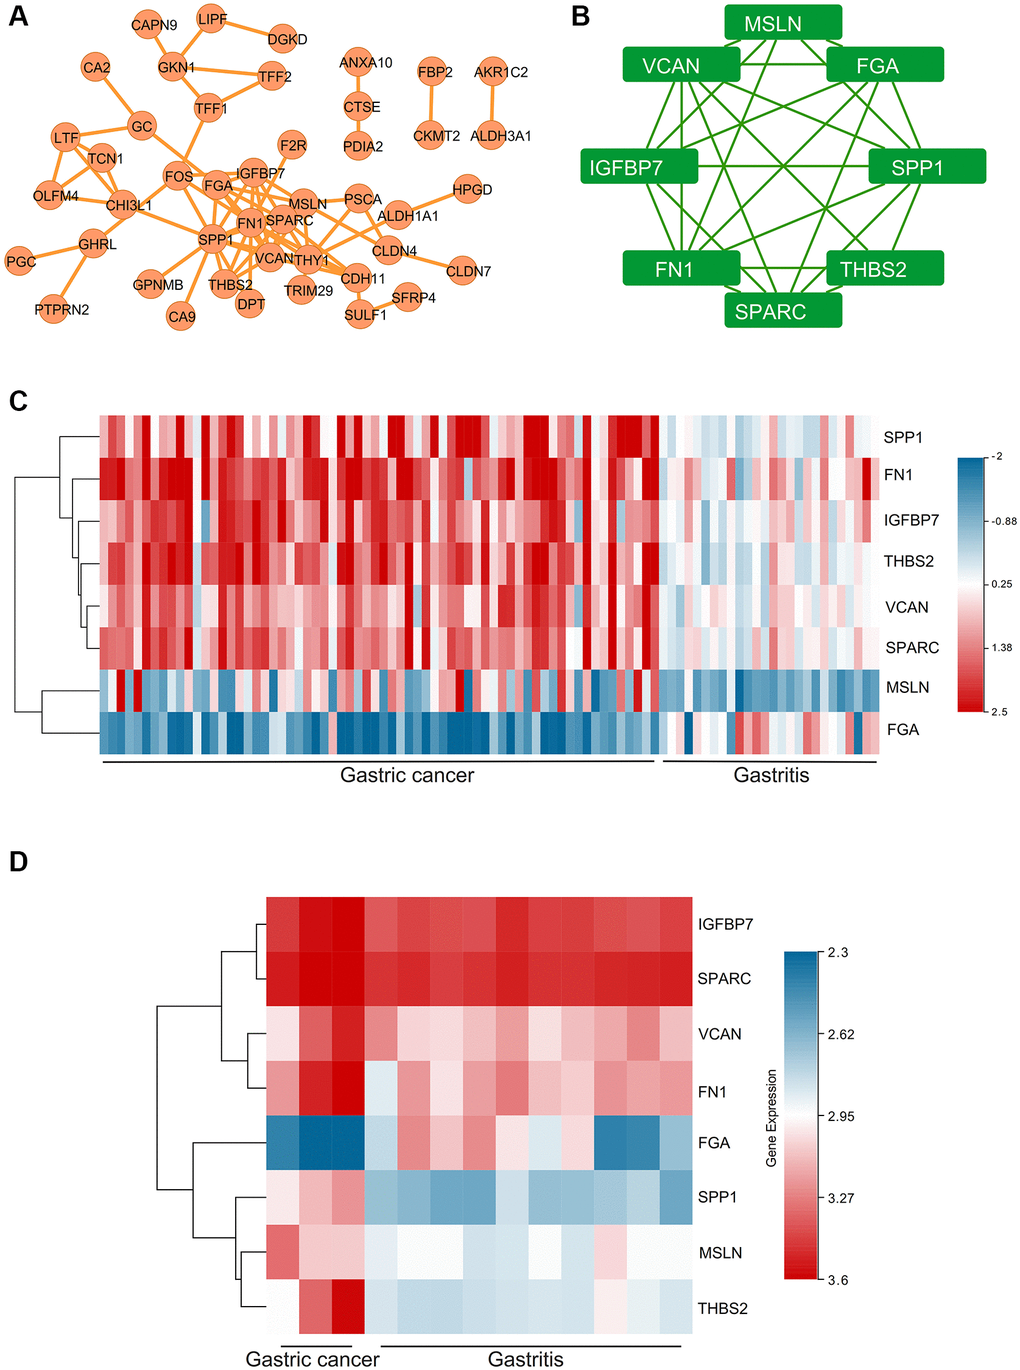 The PPI network and hub genes, expression analysis for the hub genes. (A) PPI network. (B) The key module of MCODE analysis. (C) The heat map showed the expressions of the hub genes in GSE2669. (D) The heat map showed the expressions of the hub genes in GSE116312.